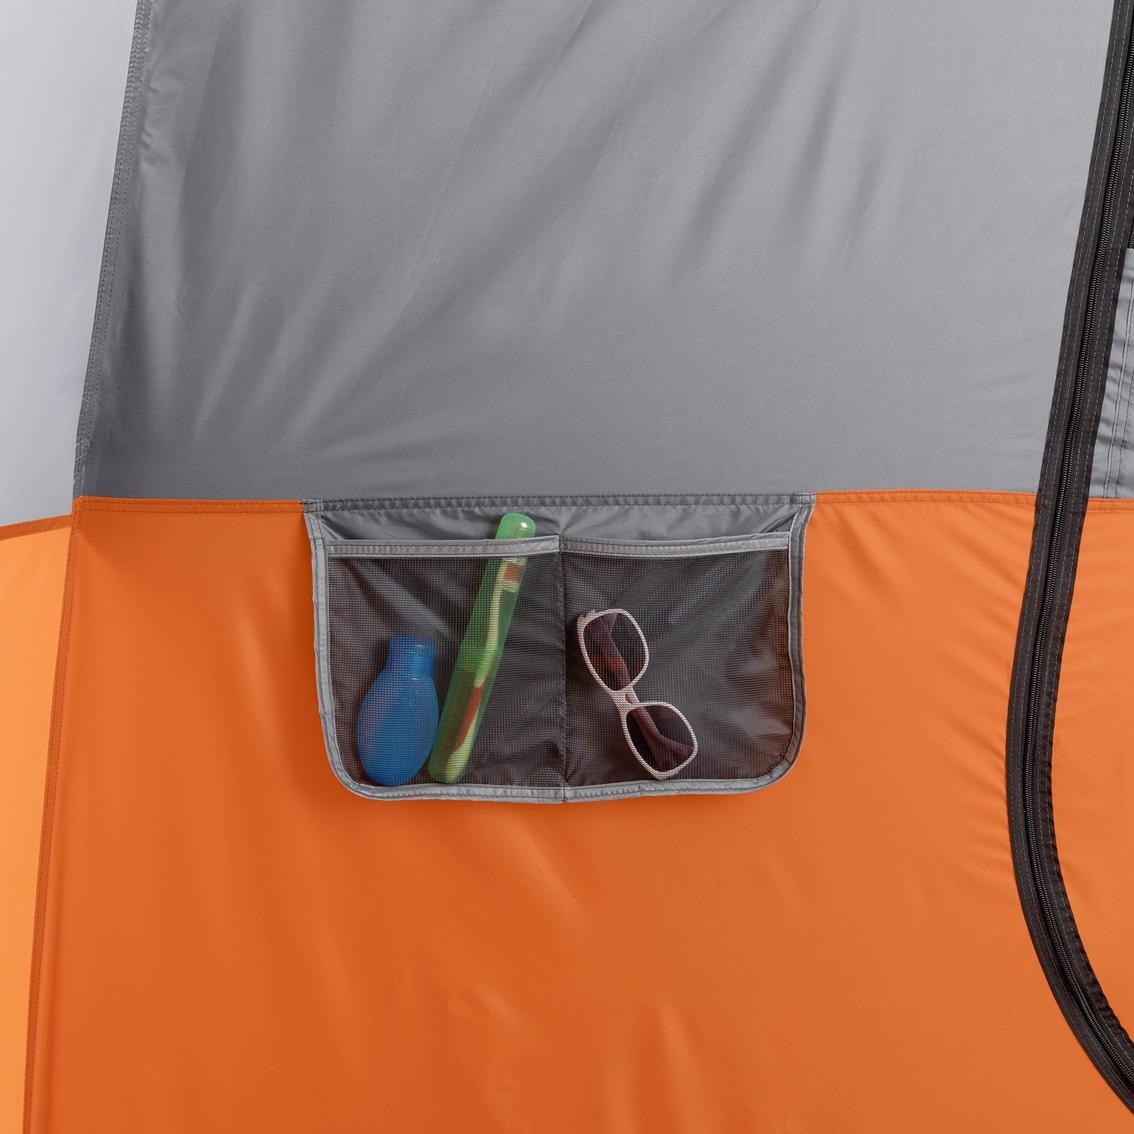 Core Equipment 11 Person Cabin Tent with Screen Room - Image 9 of 10